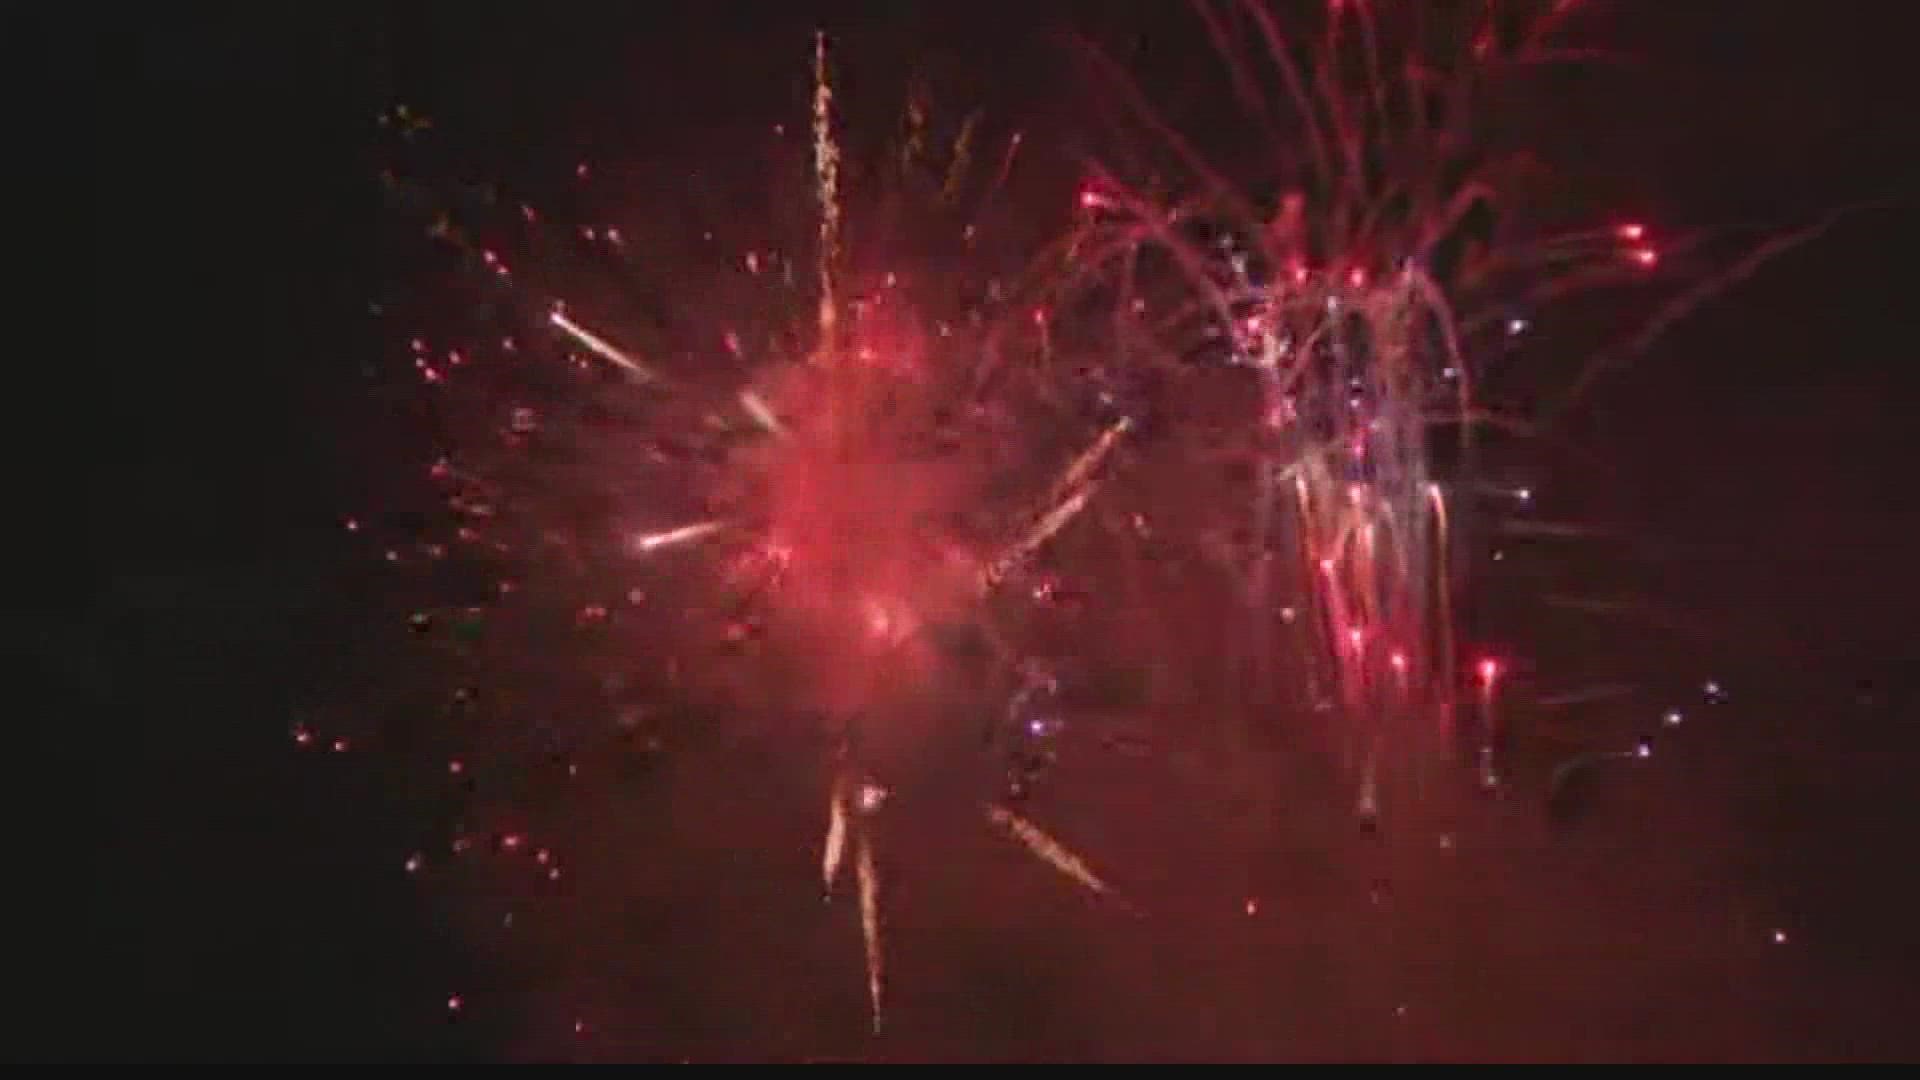 Every Fourth of July, Phoenix neighborhoods see illegal use of aerial fireworks shooting up in the air. While it’s meant for fun, the explosives risk injury or fire.